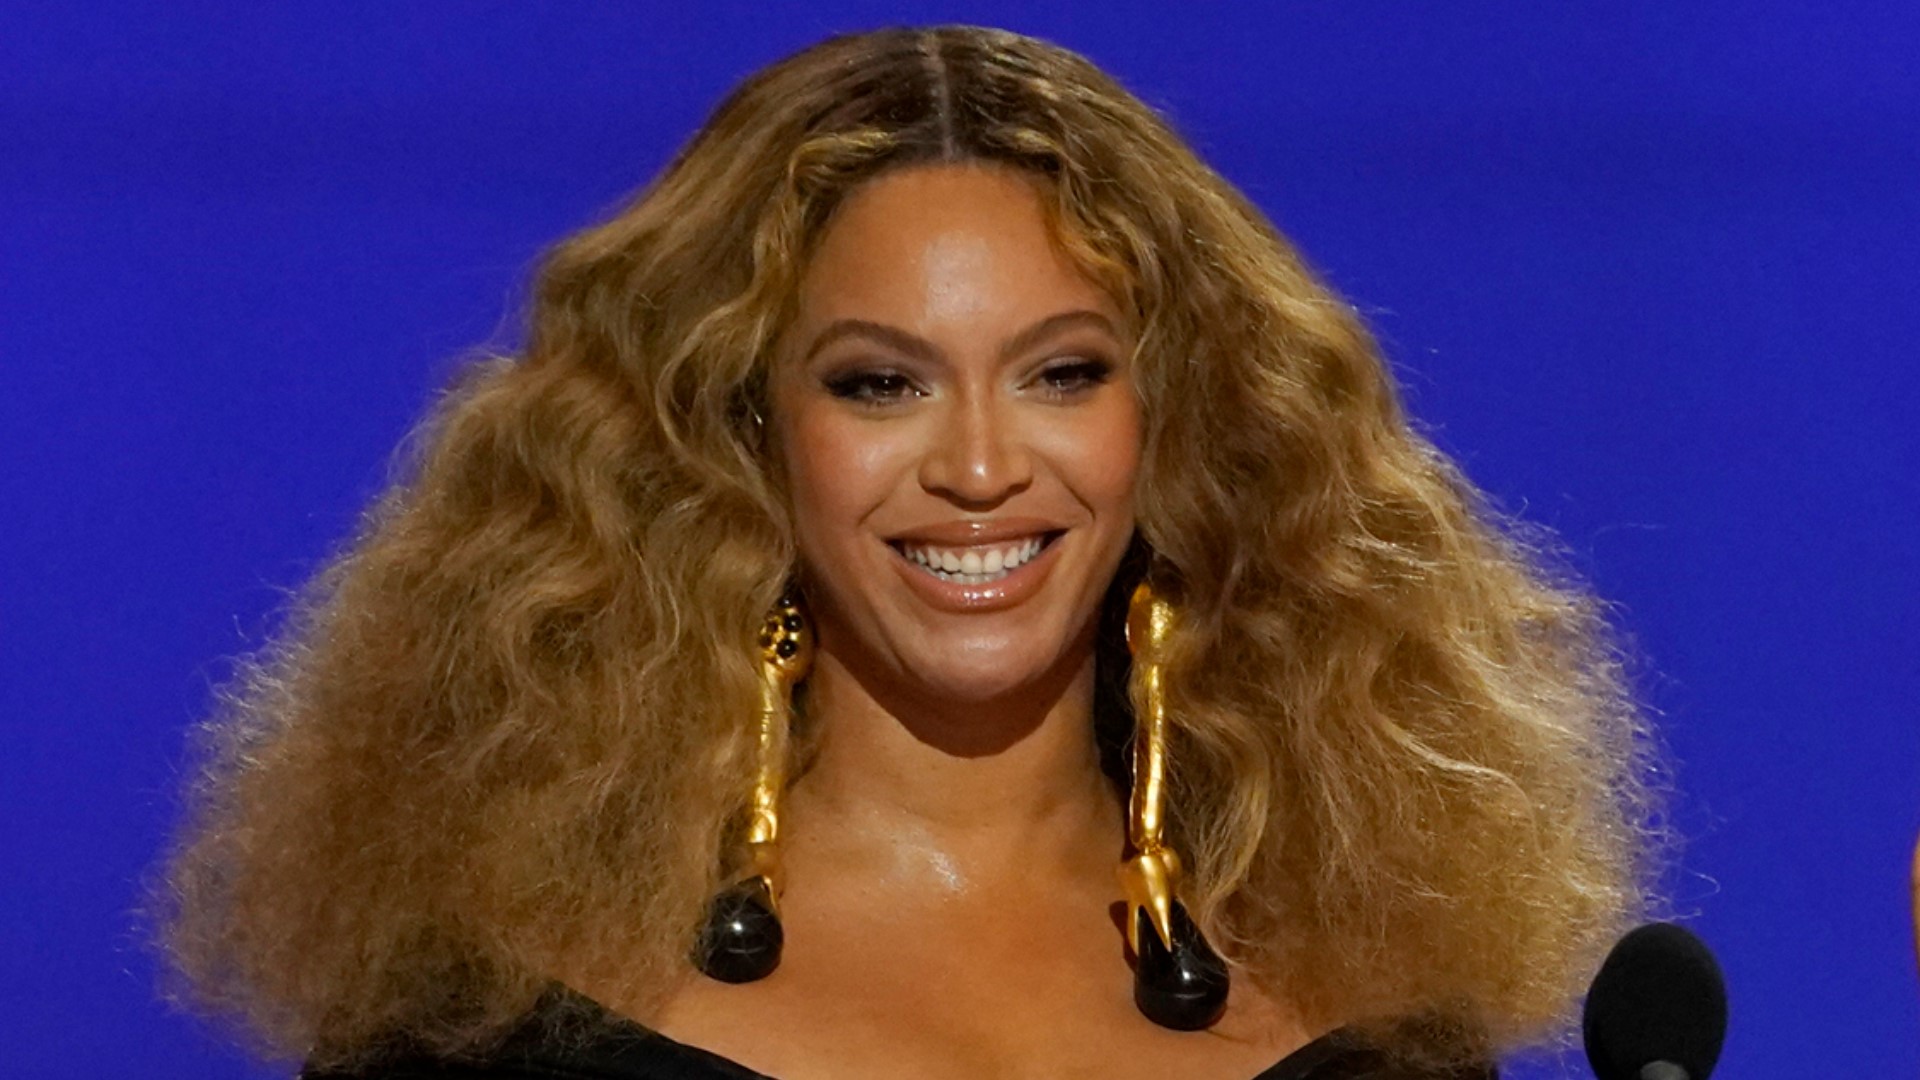 Beyoncé will be making an Aug. 21 stop at the Dome at America's Center in St. Louis.